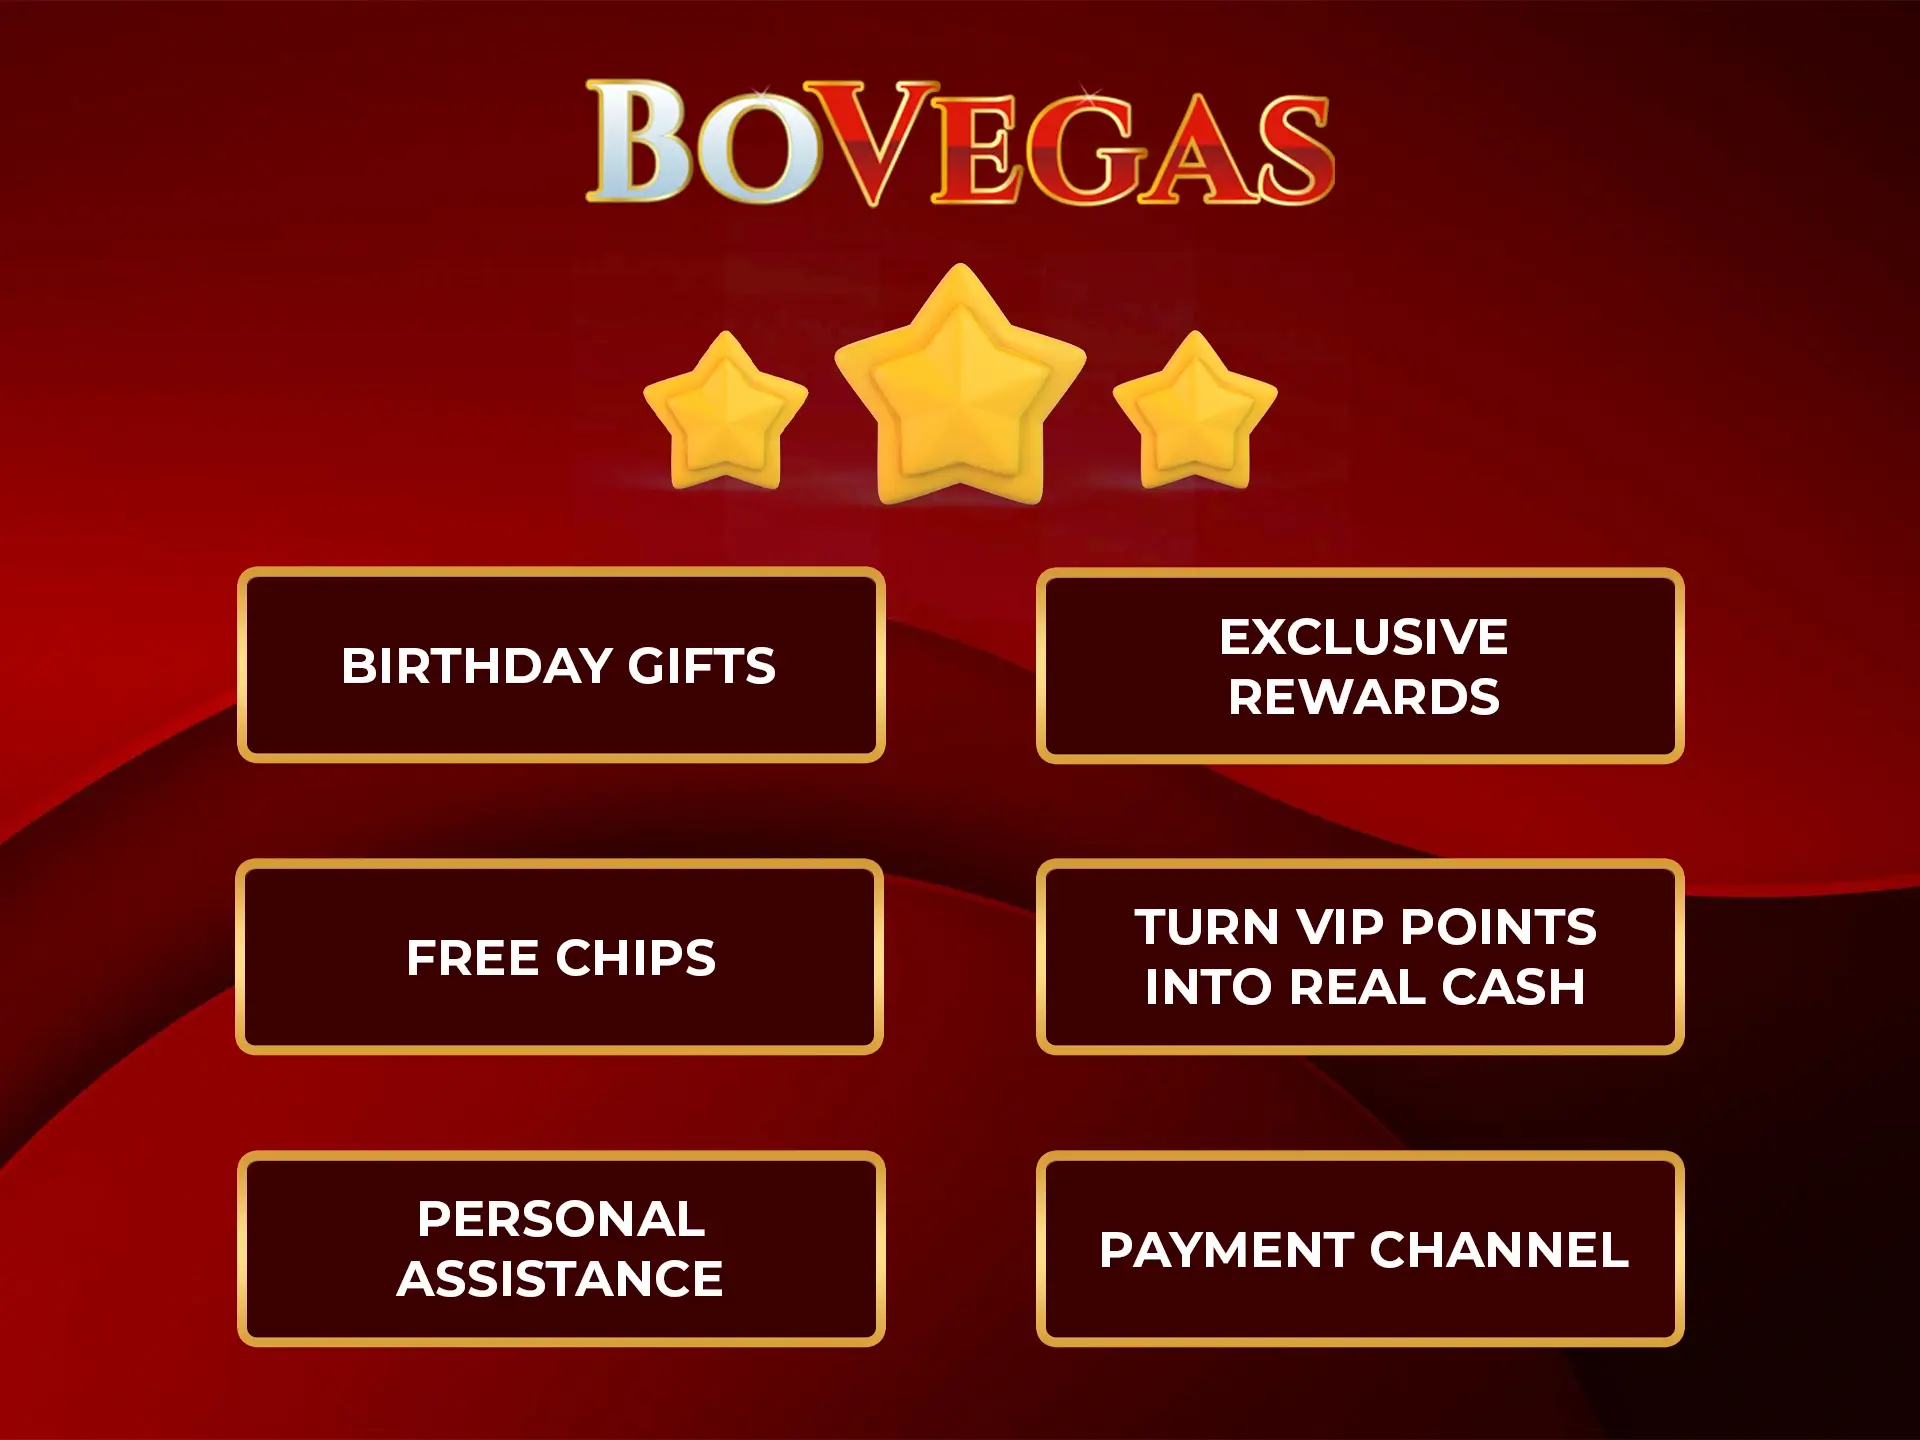 As a member of BoVegas' VIP programme you get exclusive access to the casino's personalised services and features.